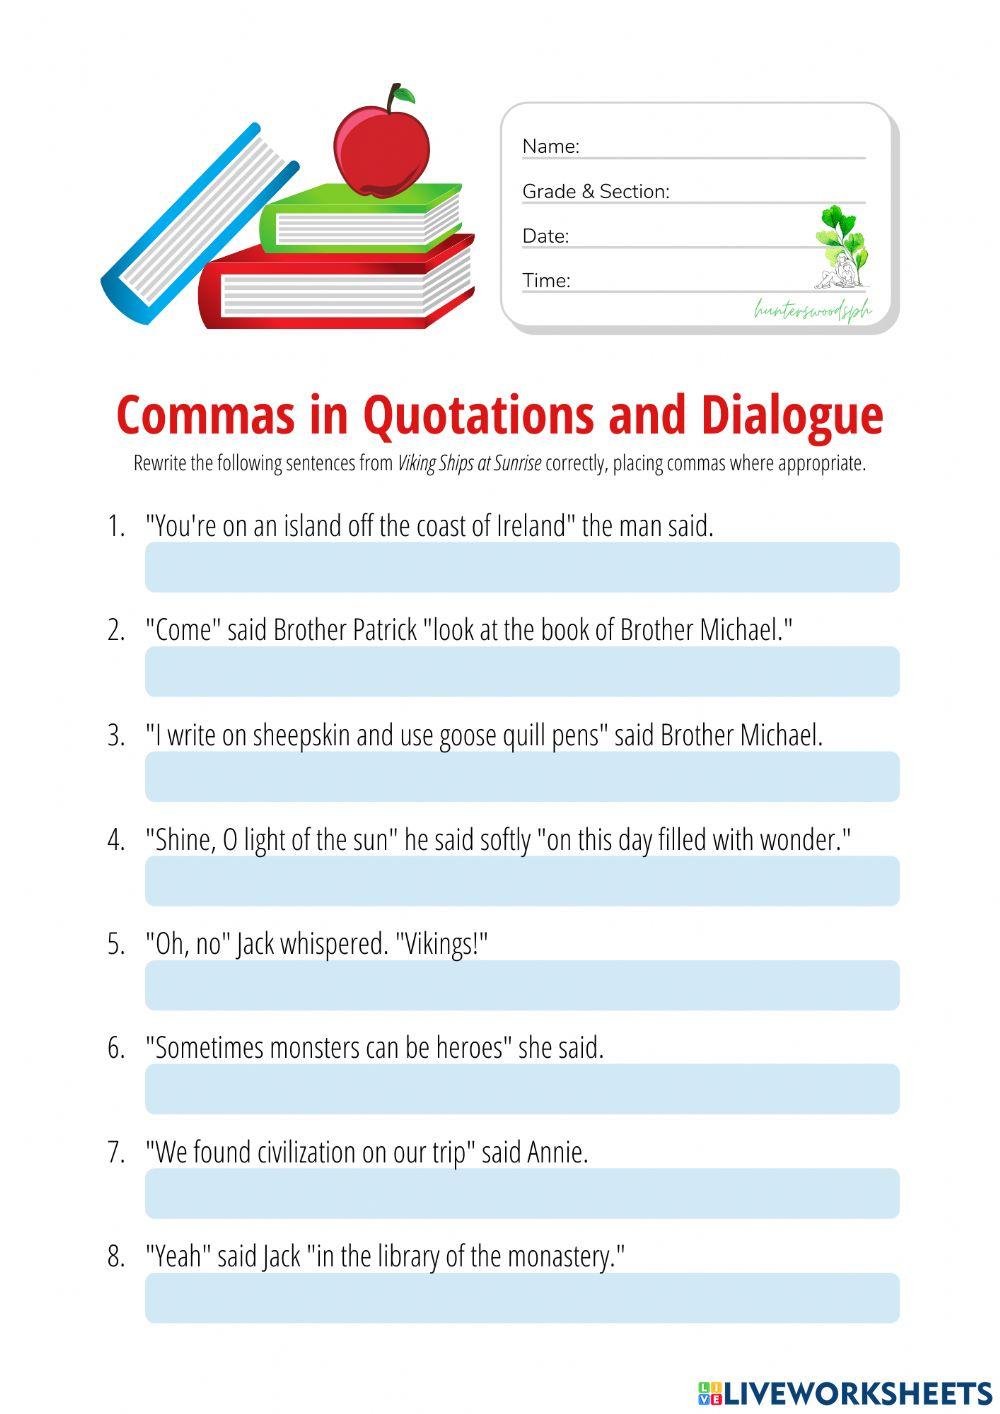 Commas in Quotations and Dialogue